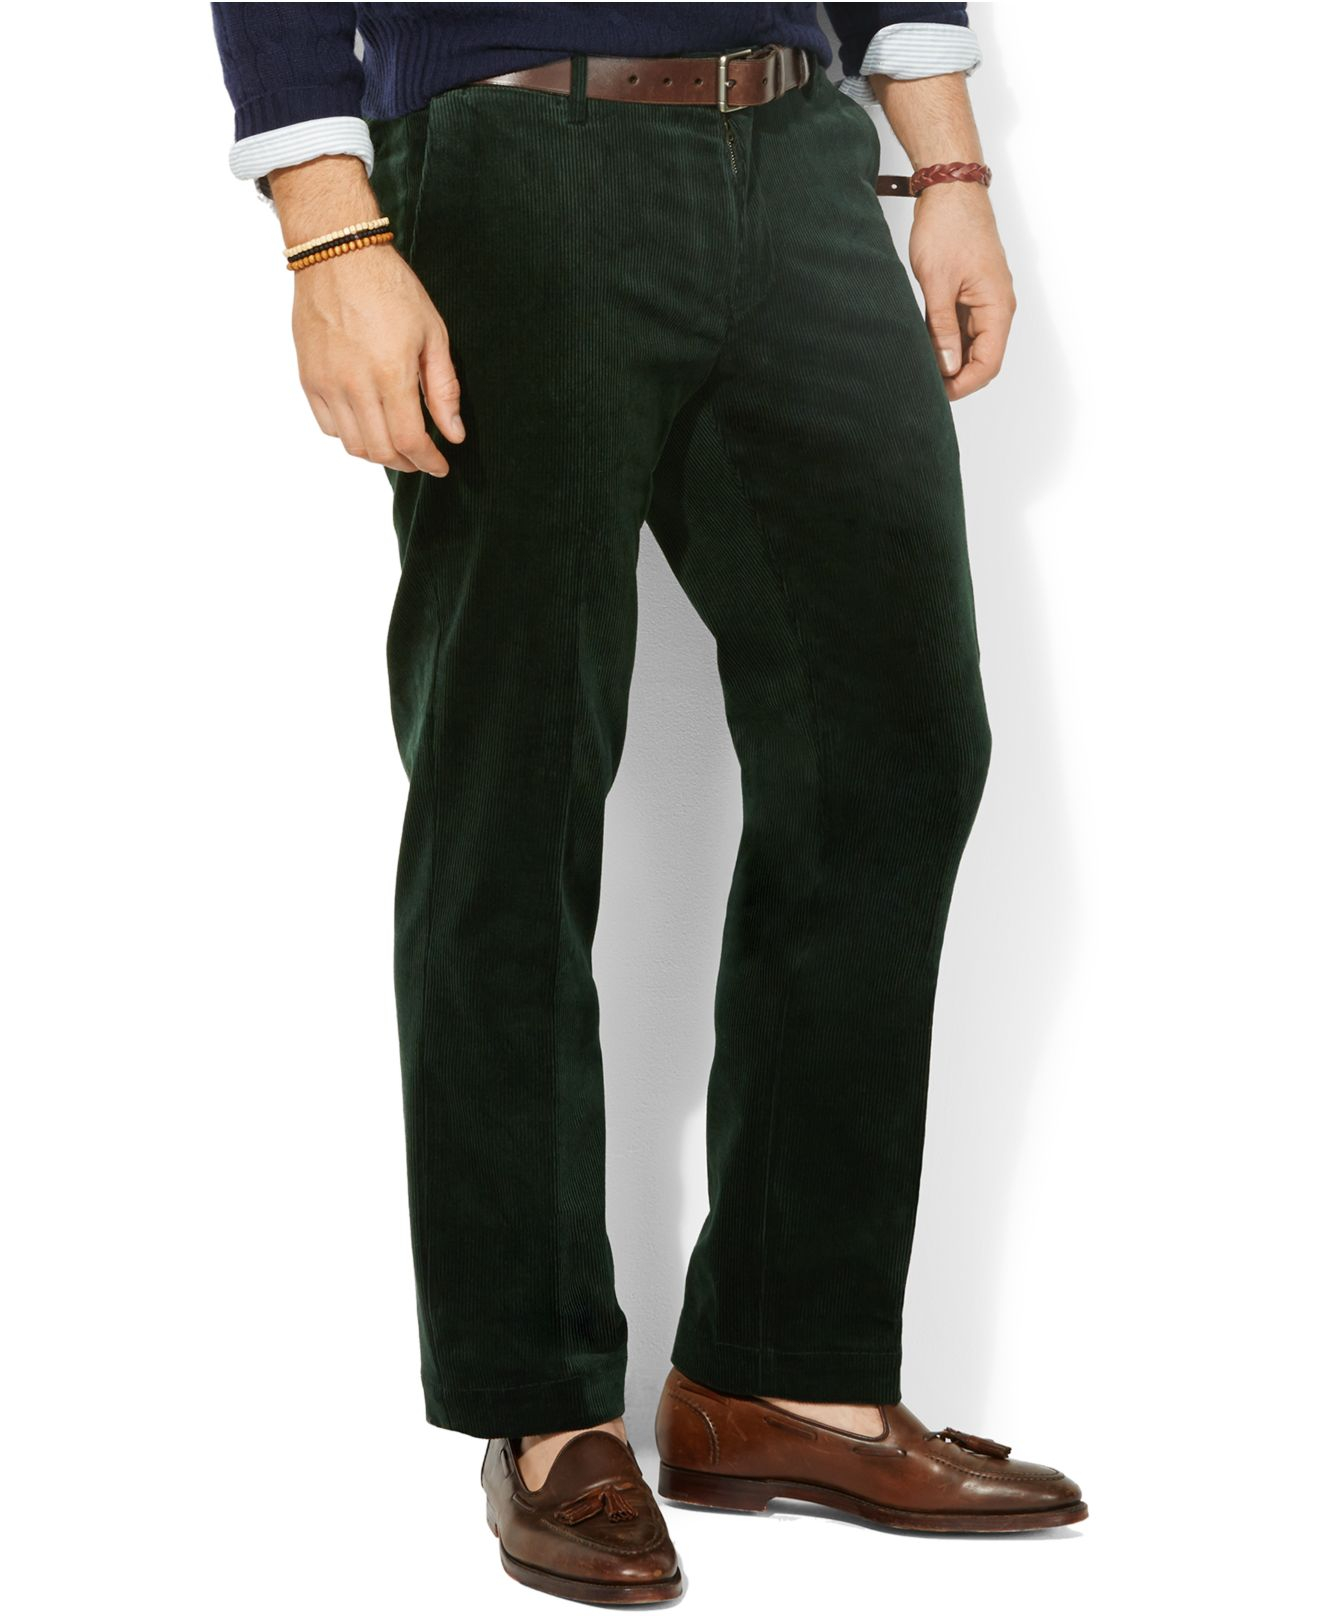 Lyst - Polo Ralph Lauren Big And Tall Ten Wale Thick Corduroy Pants in ...